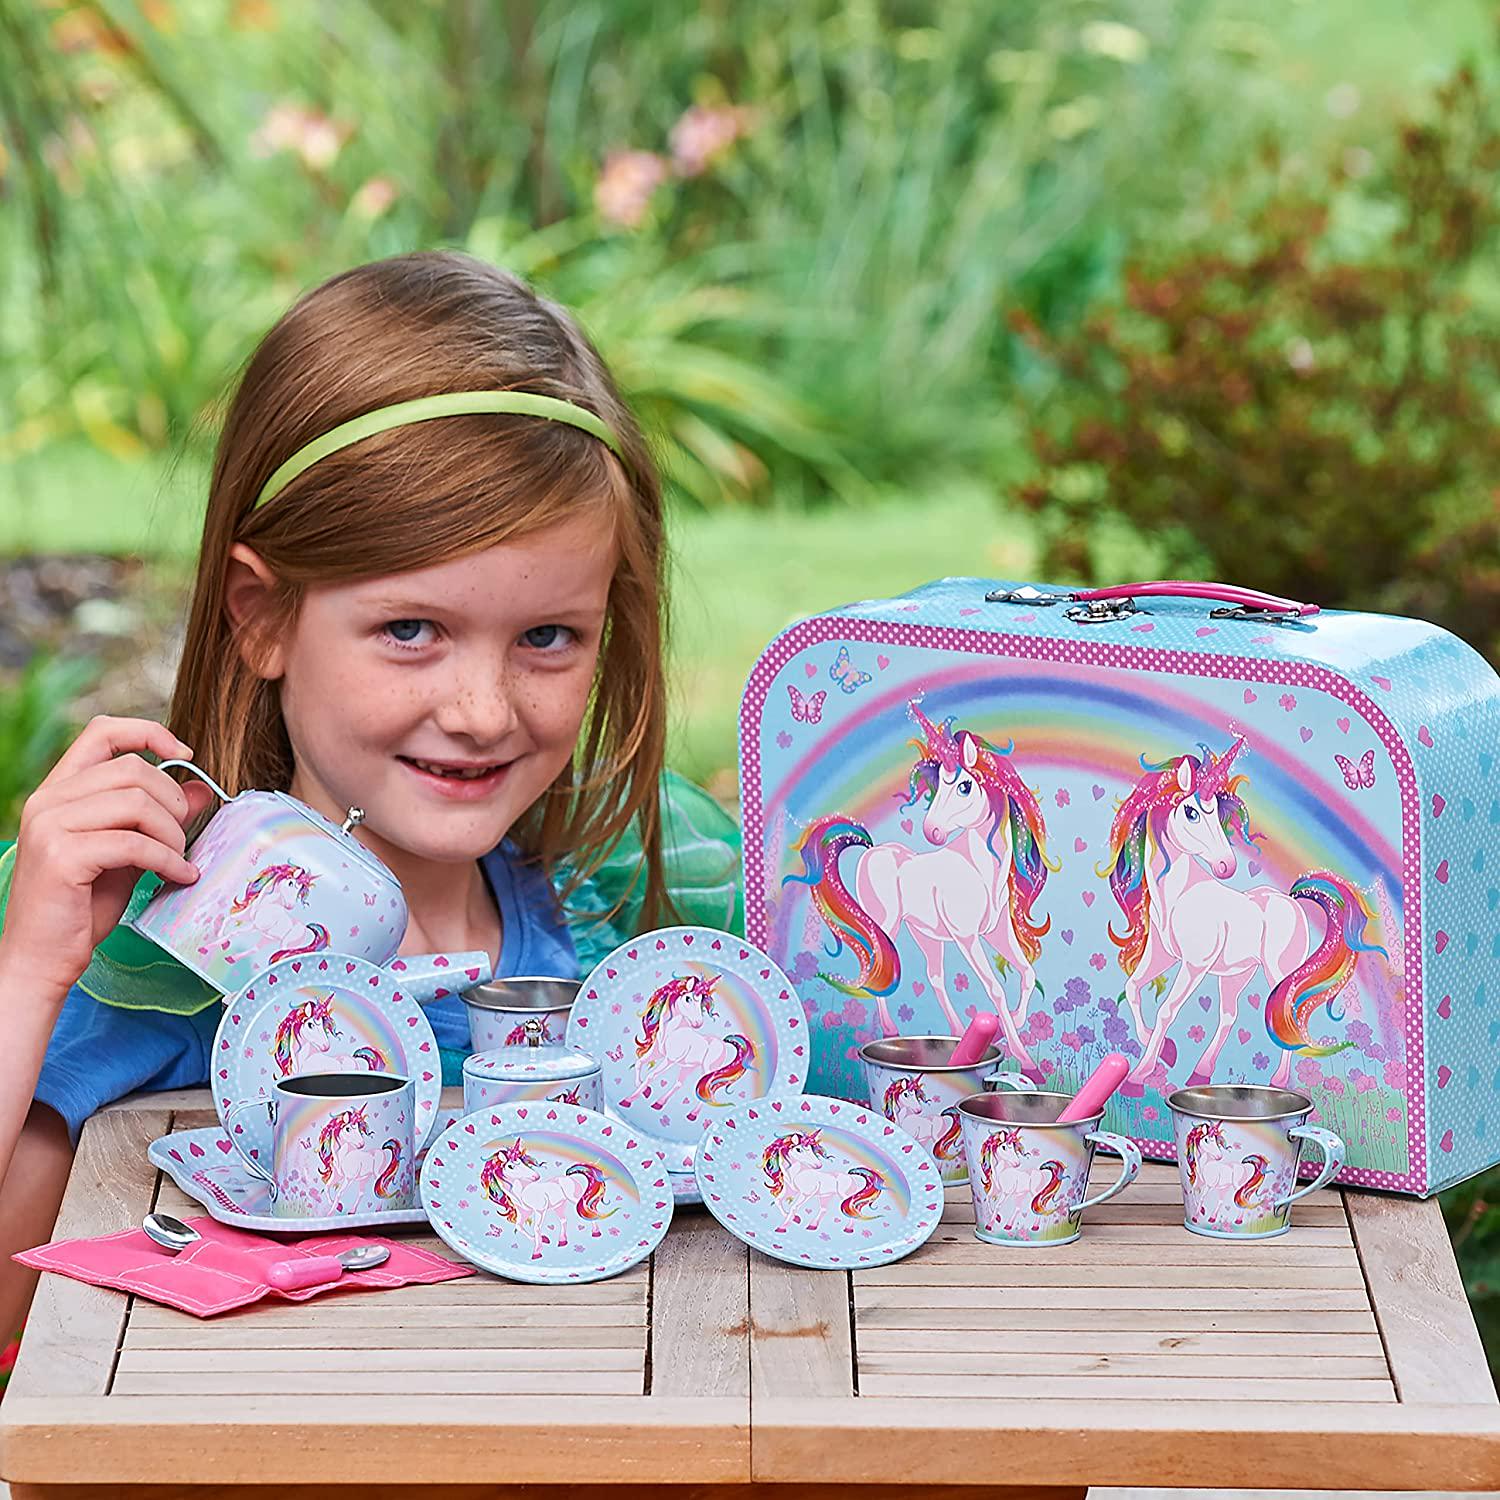 Wobbly Jelly, Wobbly Jelly 'Unicorn Dream' Metal Café Set and Carry Case Toy (14 Piece Pink Tea Set for Children)